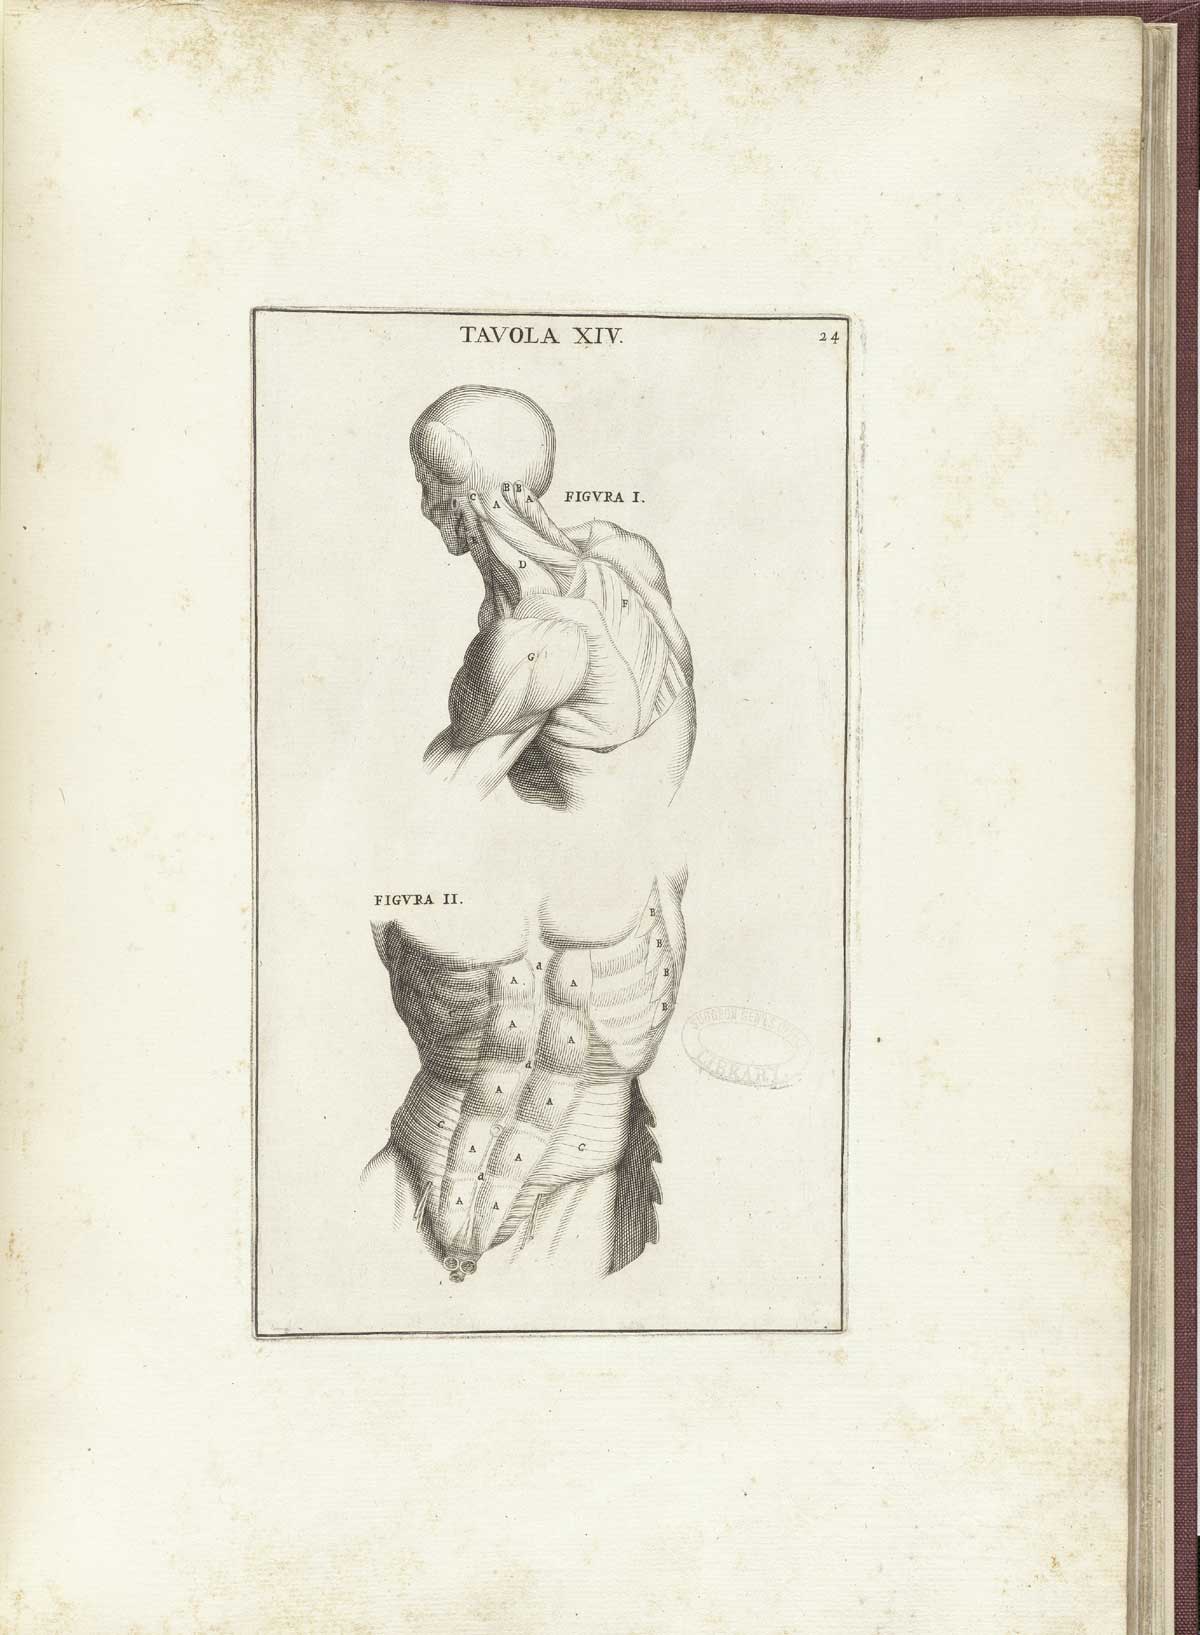 Engraving of two partial muscle figures with flesh removed to show musculature in detail: the one at top from the shoulders up showing the muscles of the shoulders and neck; the one at bottom shows the muscles of the abdomen; from Bernardino Genga’s Anatomia per uso et intelligenza del disegno, NLM Call no.: WZ 250 G329an 1691.